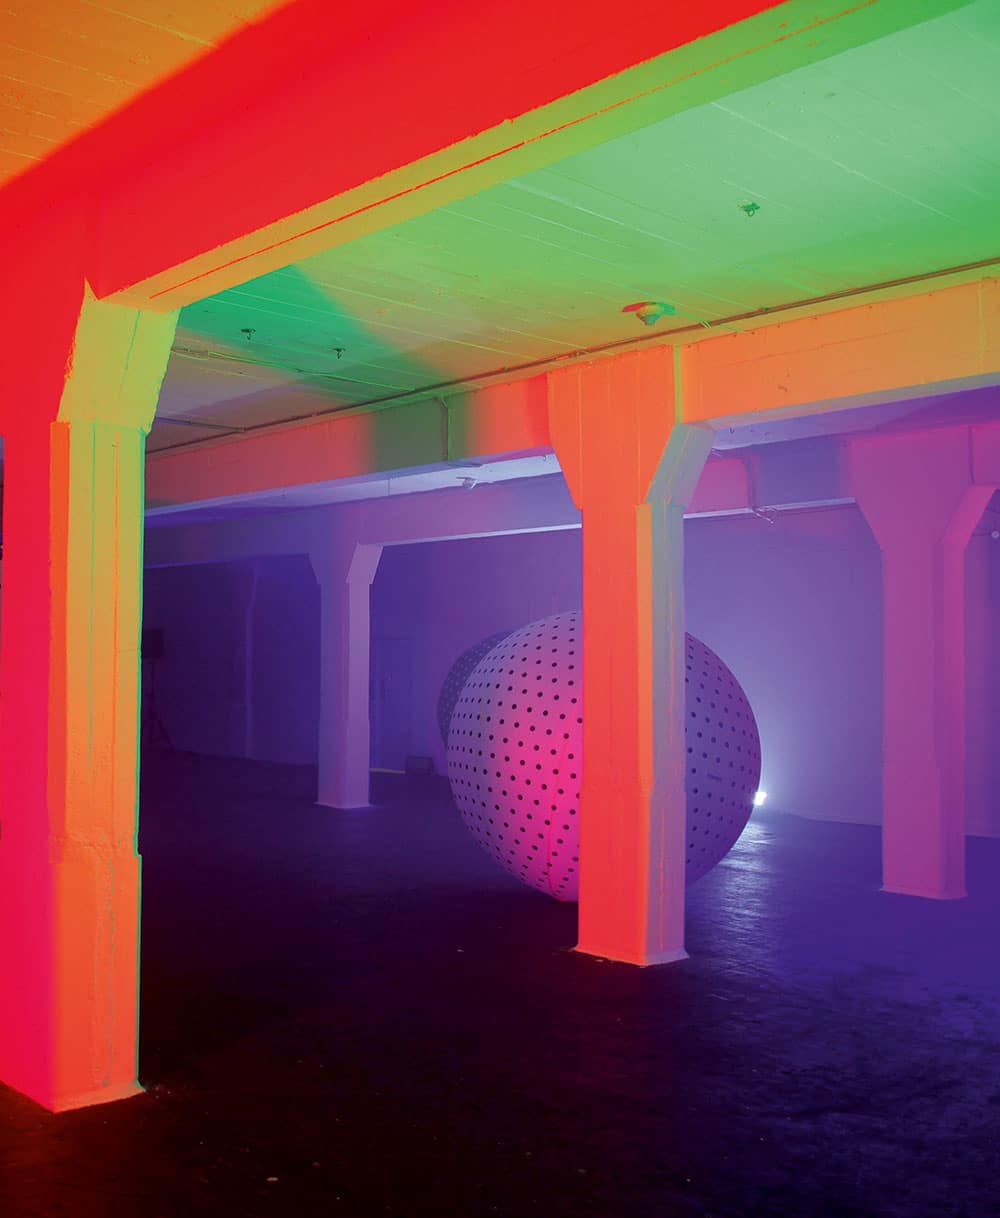 Artwork by Yuri Suzuki called »Synthesizer Playground«. Depicted is a room with white walls and columns and a dark ground, maybe a warehouse or a parking house. There are two inflatable spheres with polkadots in this room between the columns. Differently colored light is coming from unknown light sources